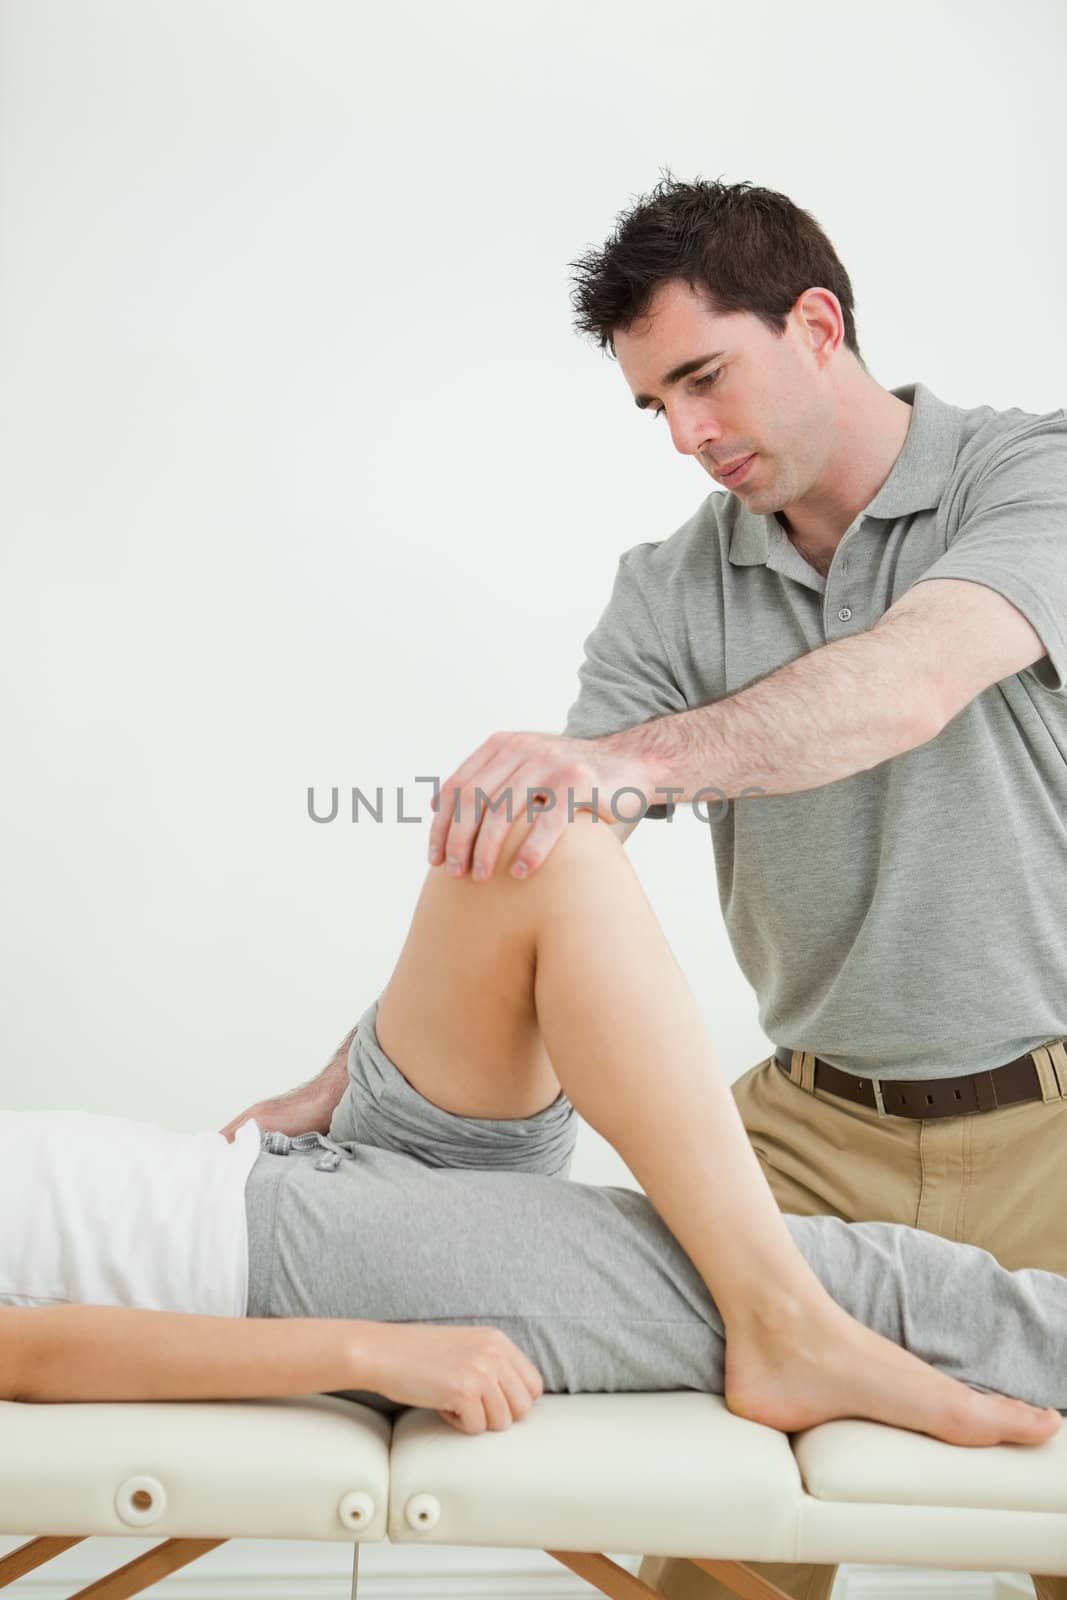 Serious physiotherapist stretching a leg while standing in a room